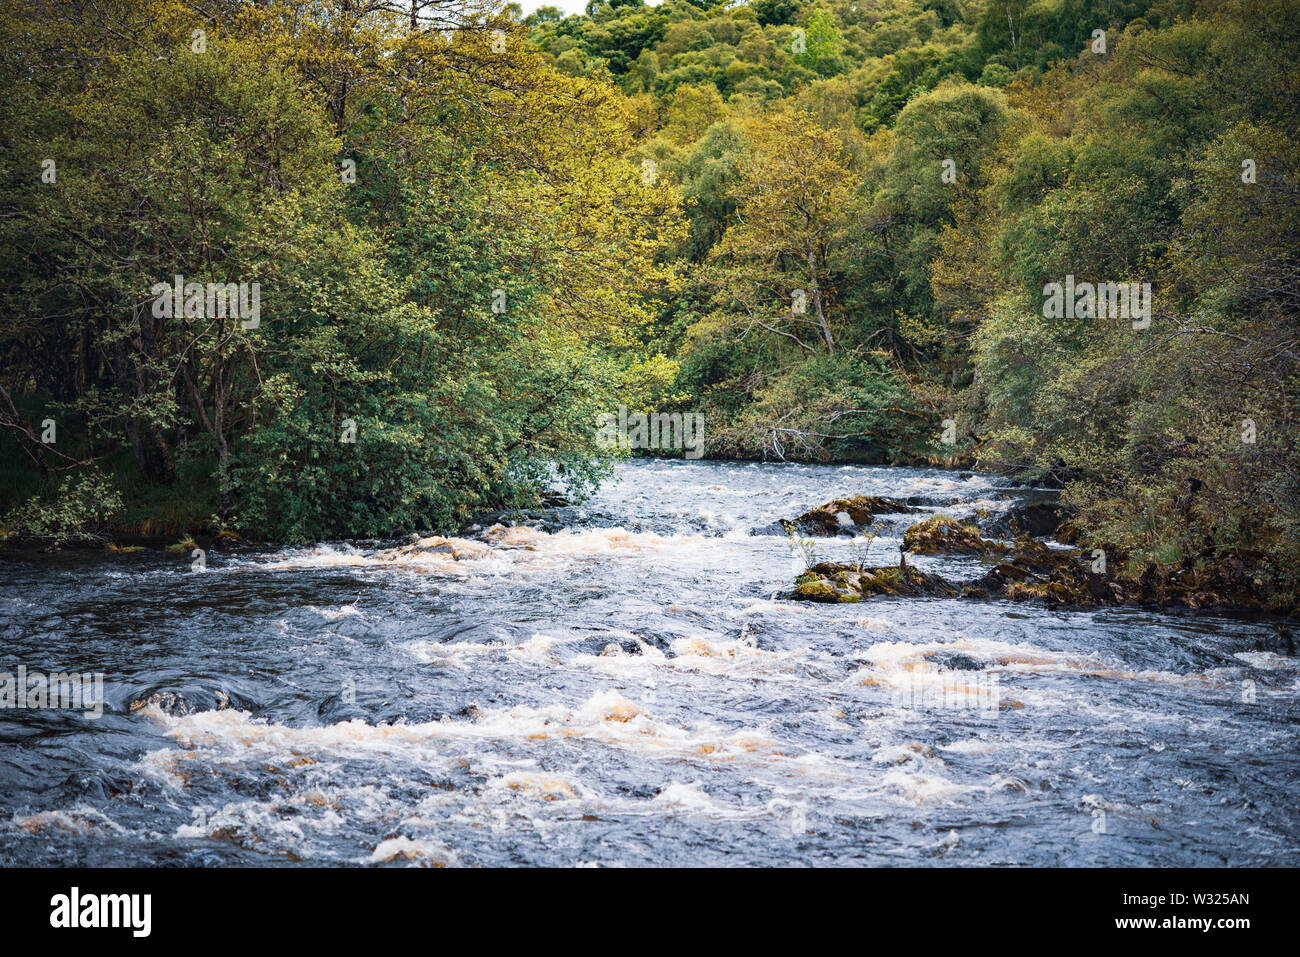 Bubbling river Shin surrounded by Shin forest Stock Photo